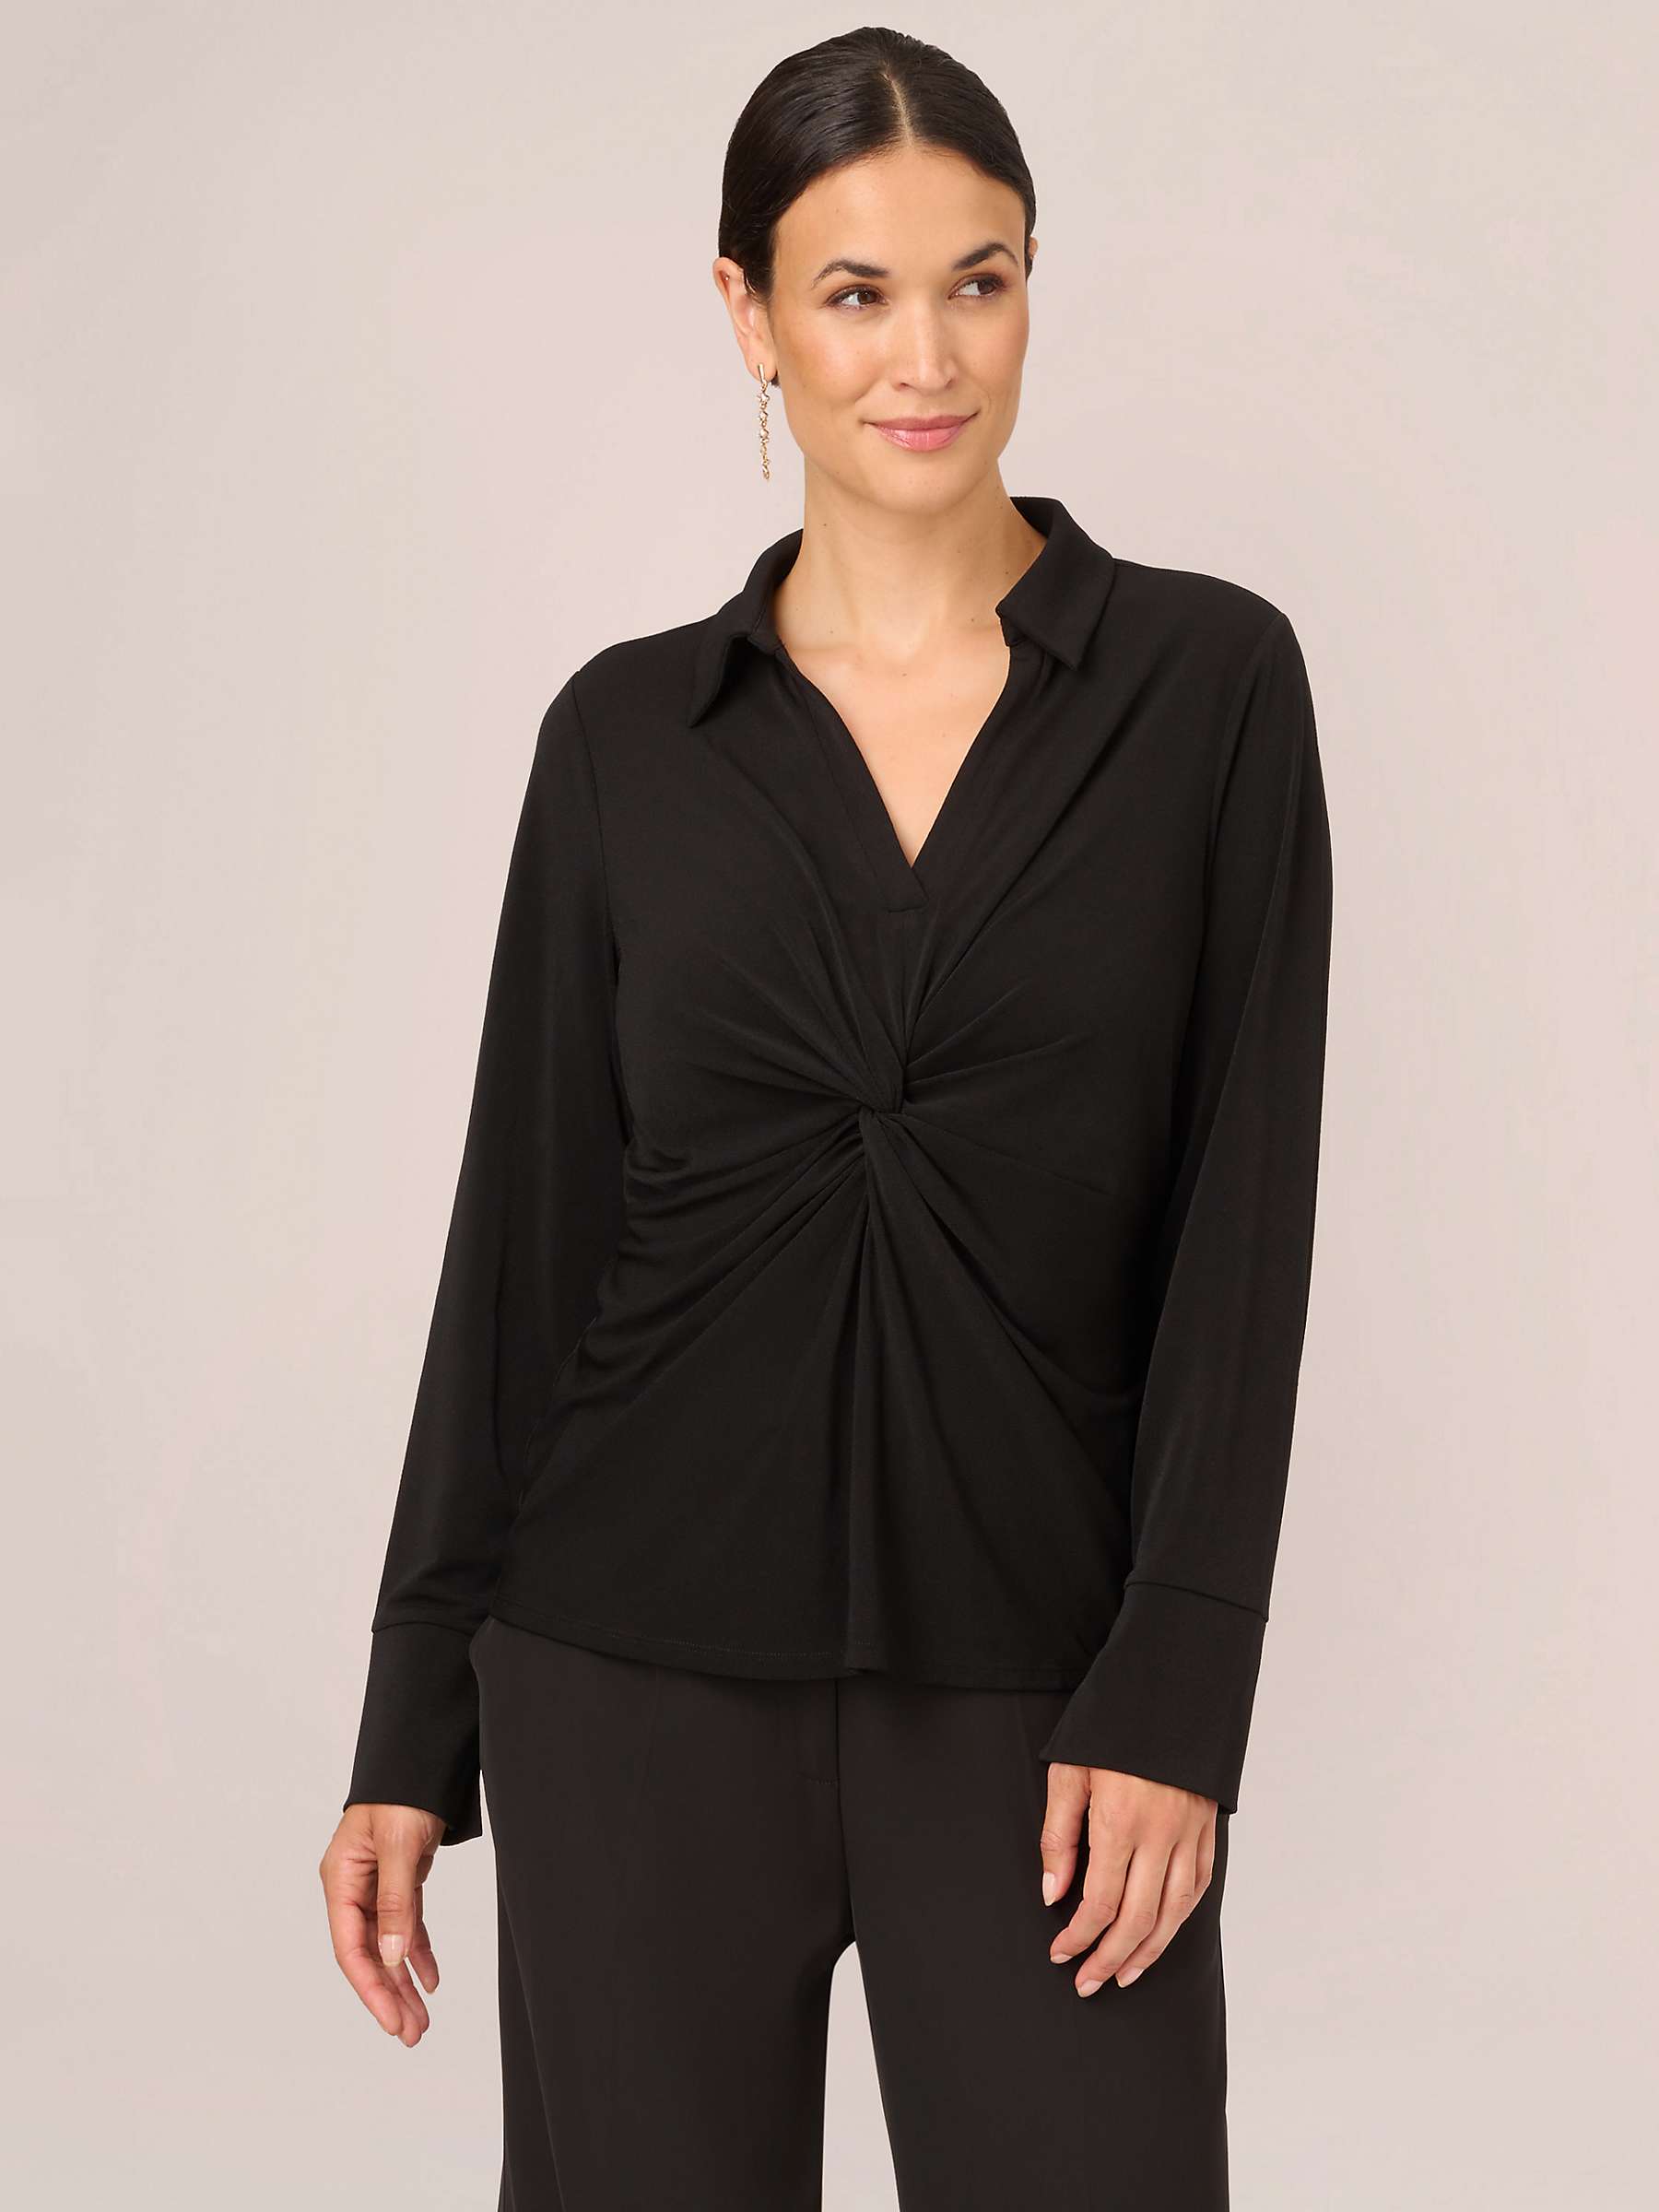 Buy Adrianna Papell Long Sleeve Twist Front Shirt, Black Online at johnlewis.com